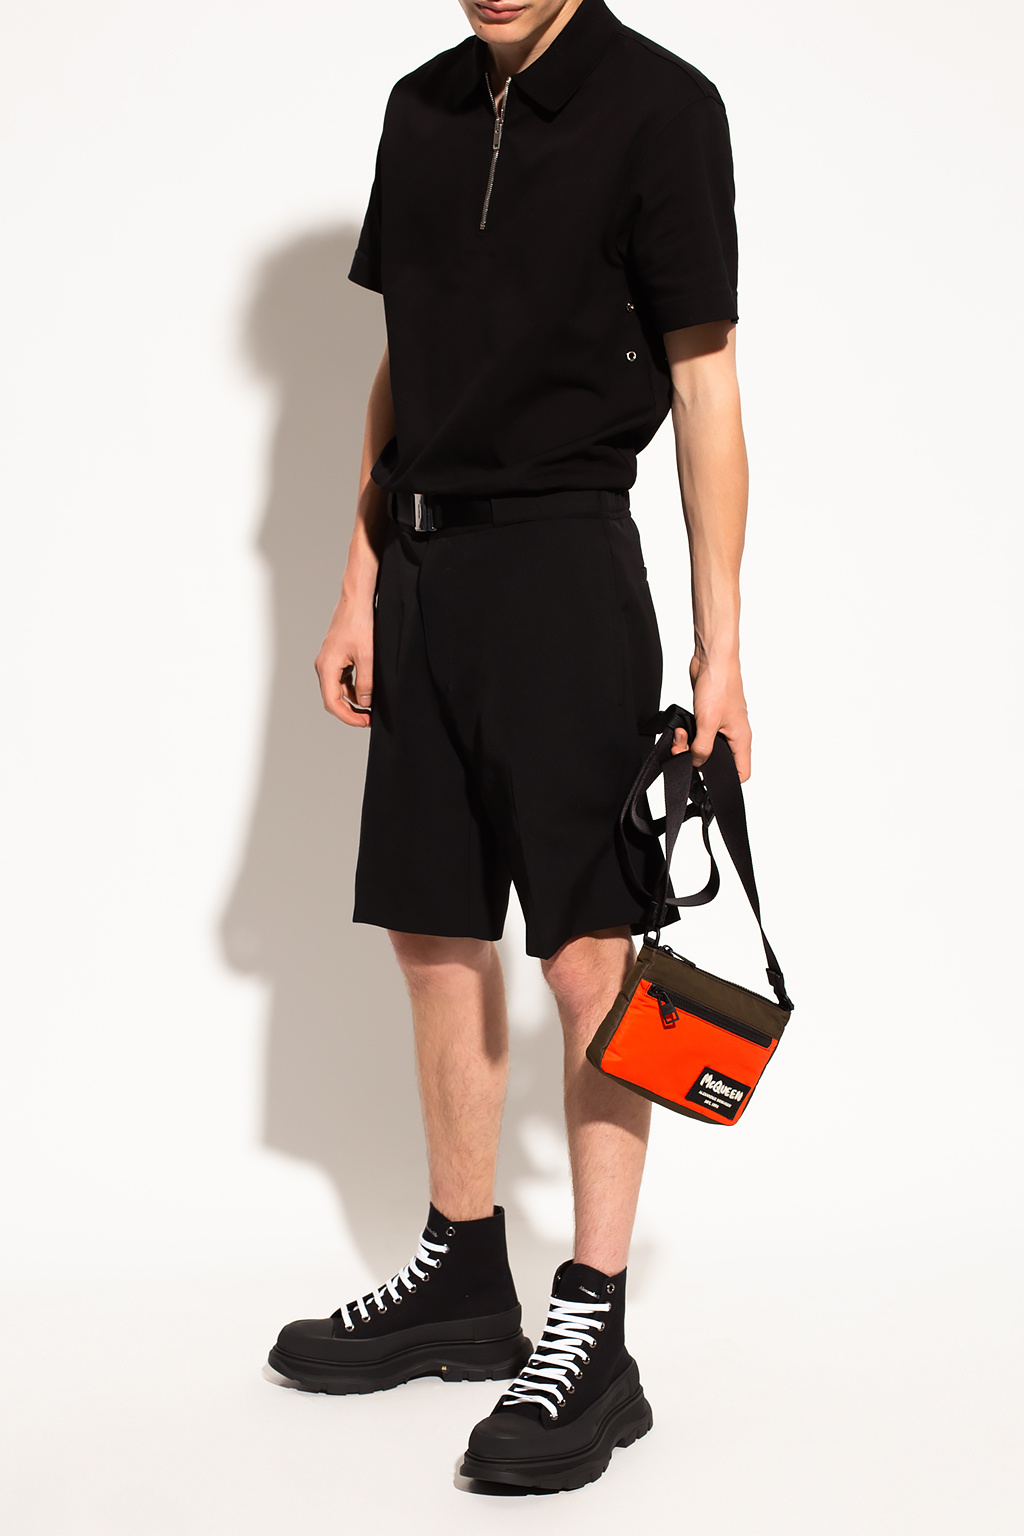 Givenchy Polo shirt with zip | Men's Clothing | Vitkac